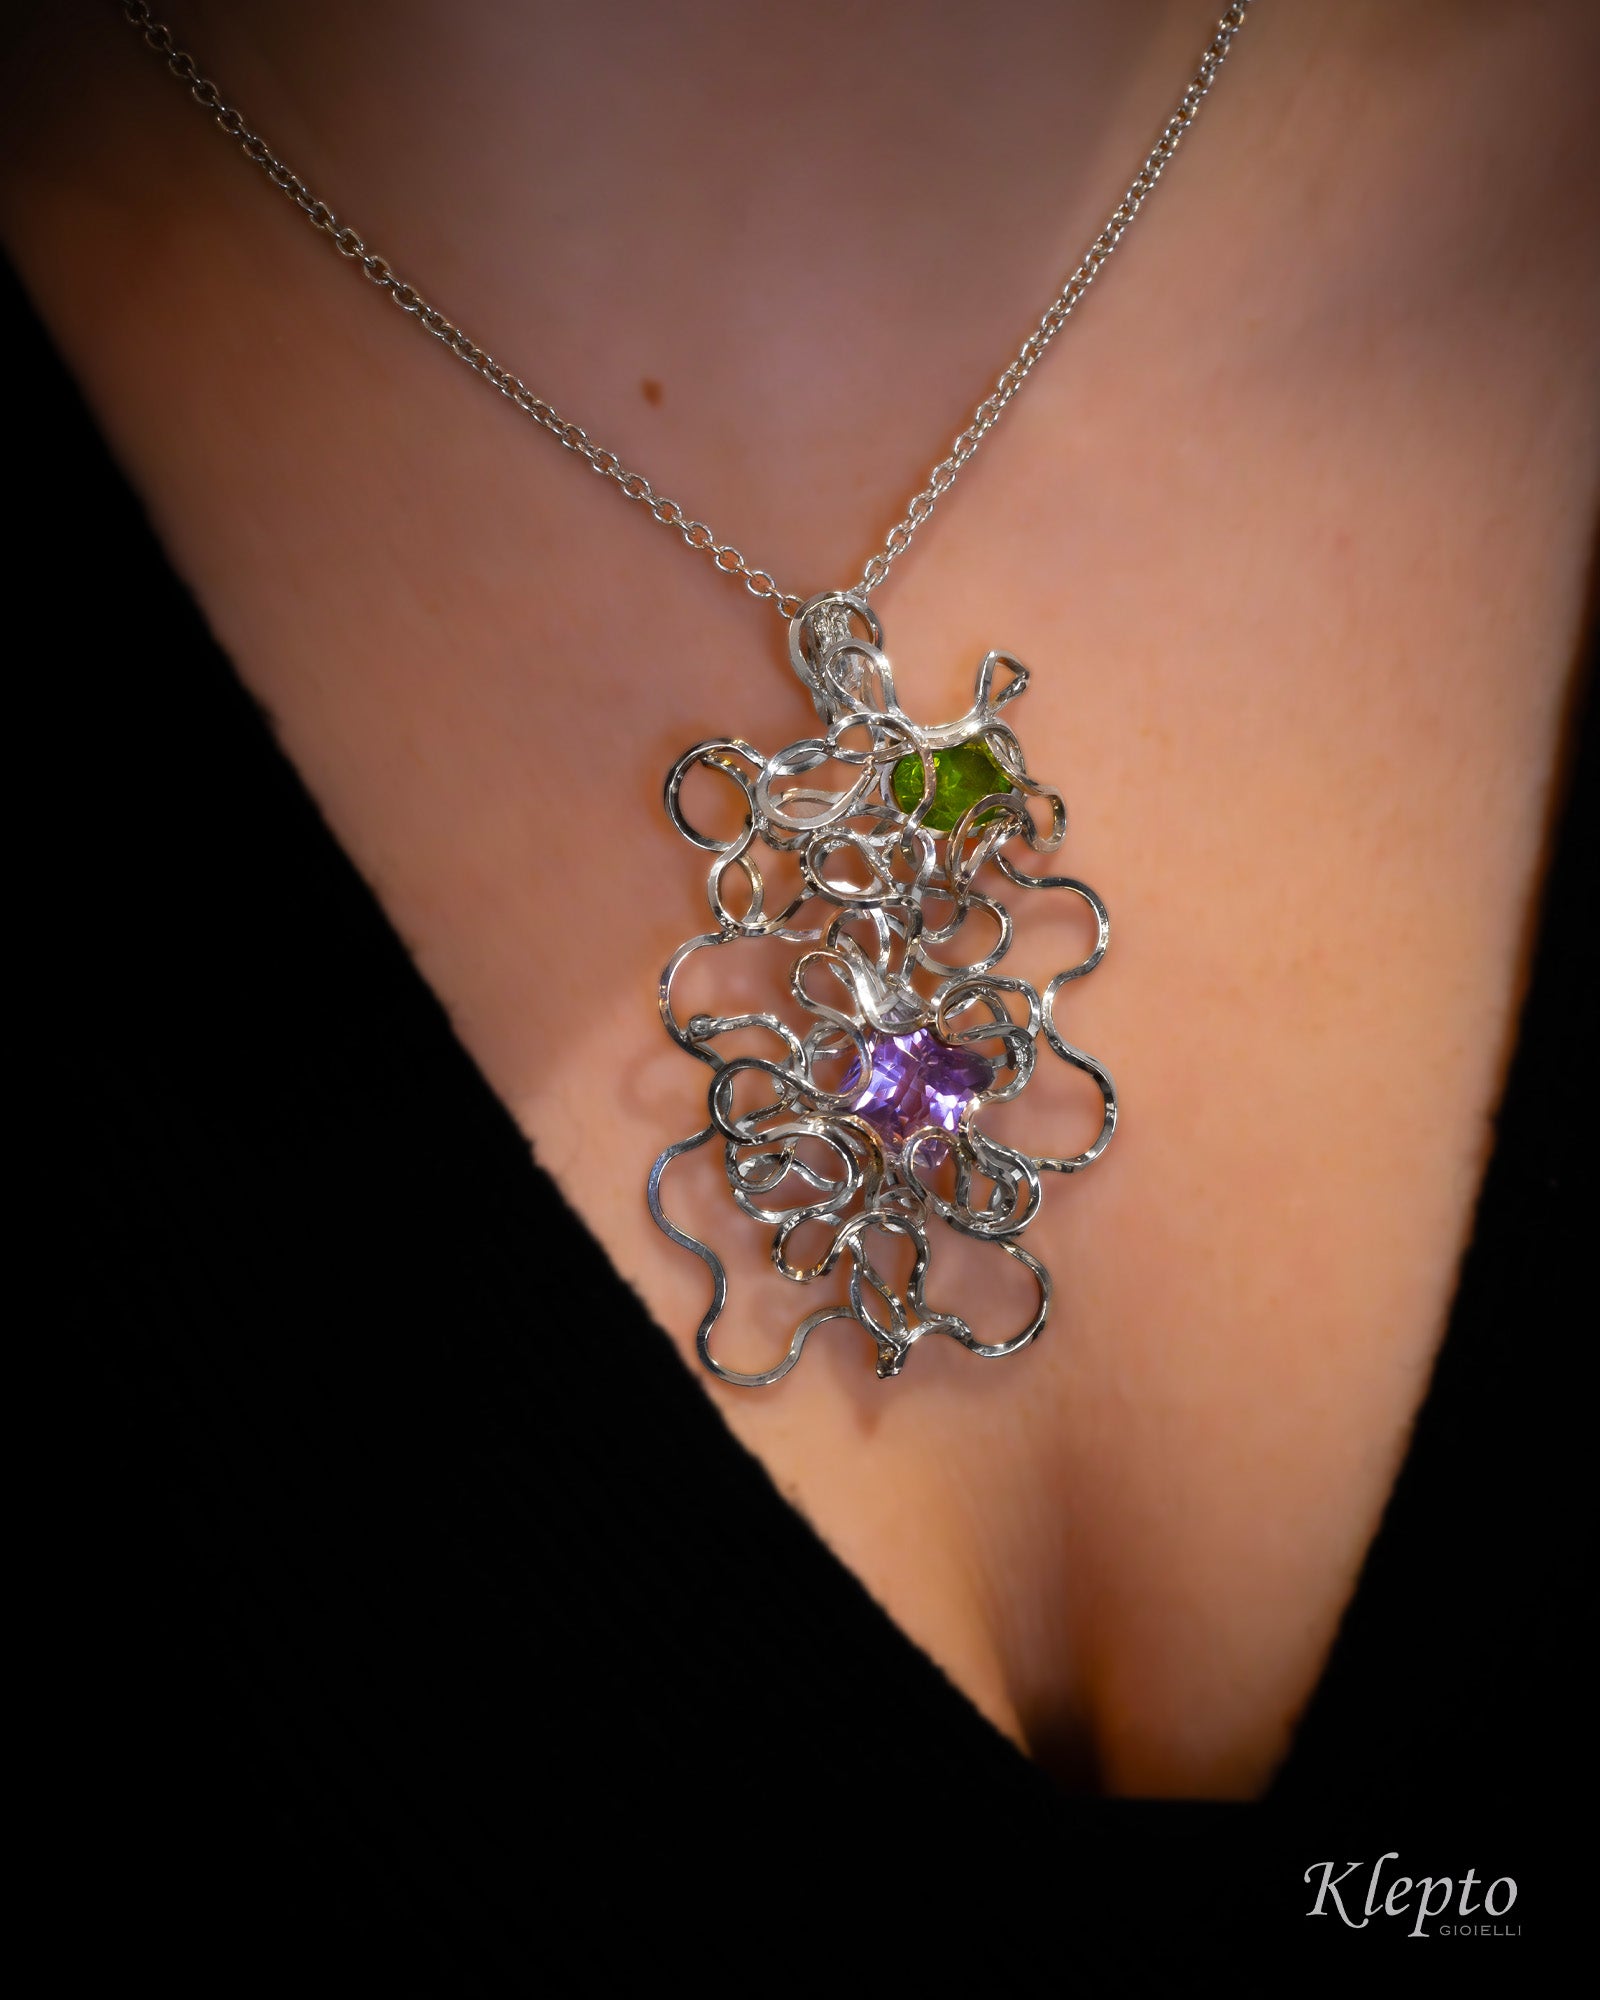 Pendant in Silnova® Silver flush with Amethyst and Peridot